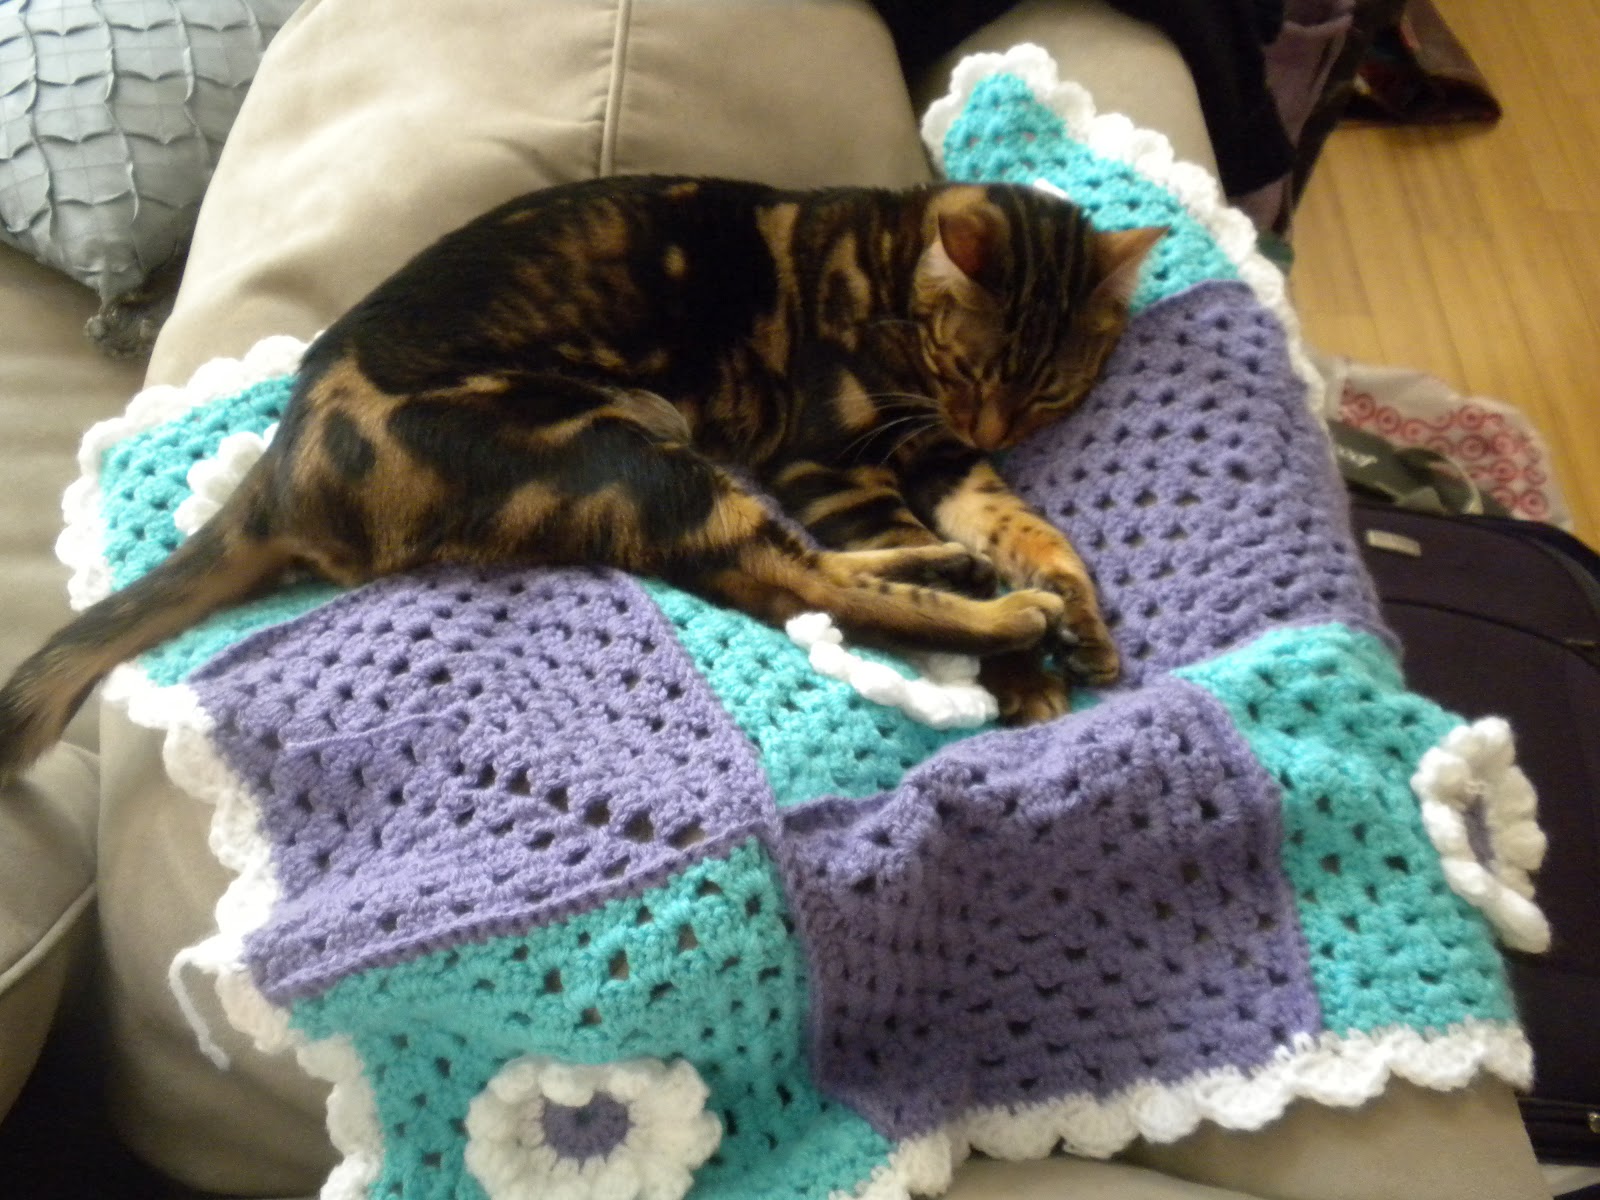 Jedi Craft Girl: A blanket for Marbles